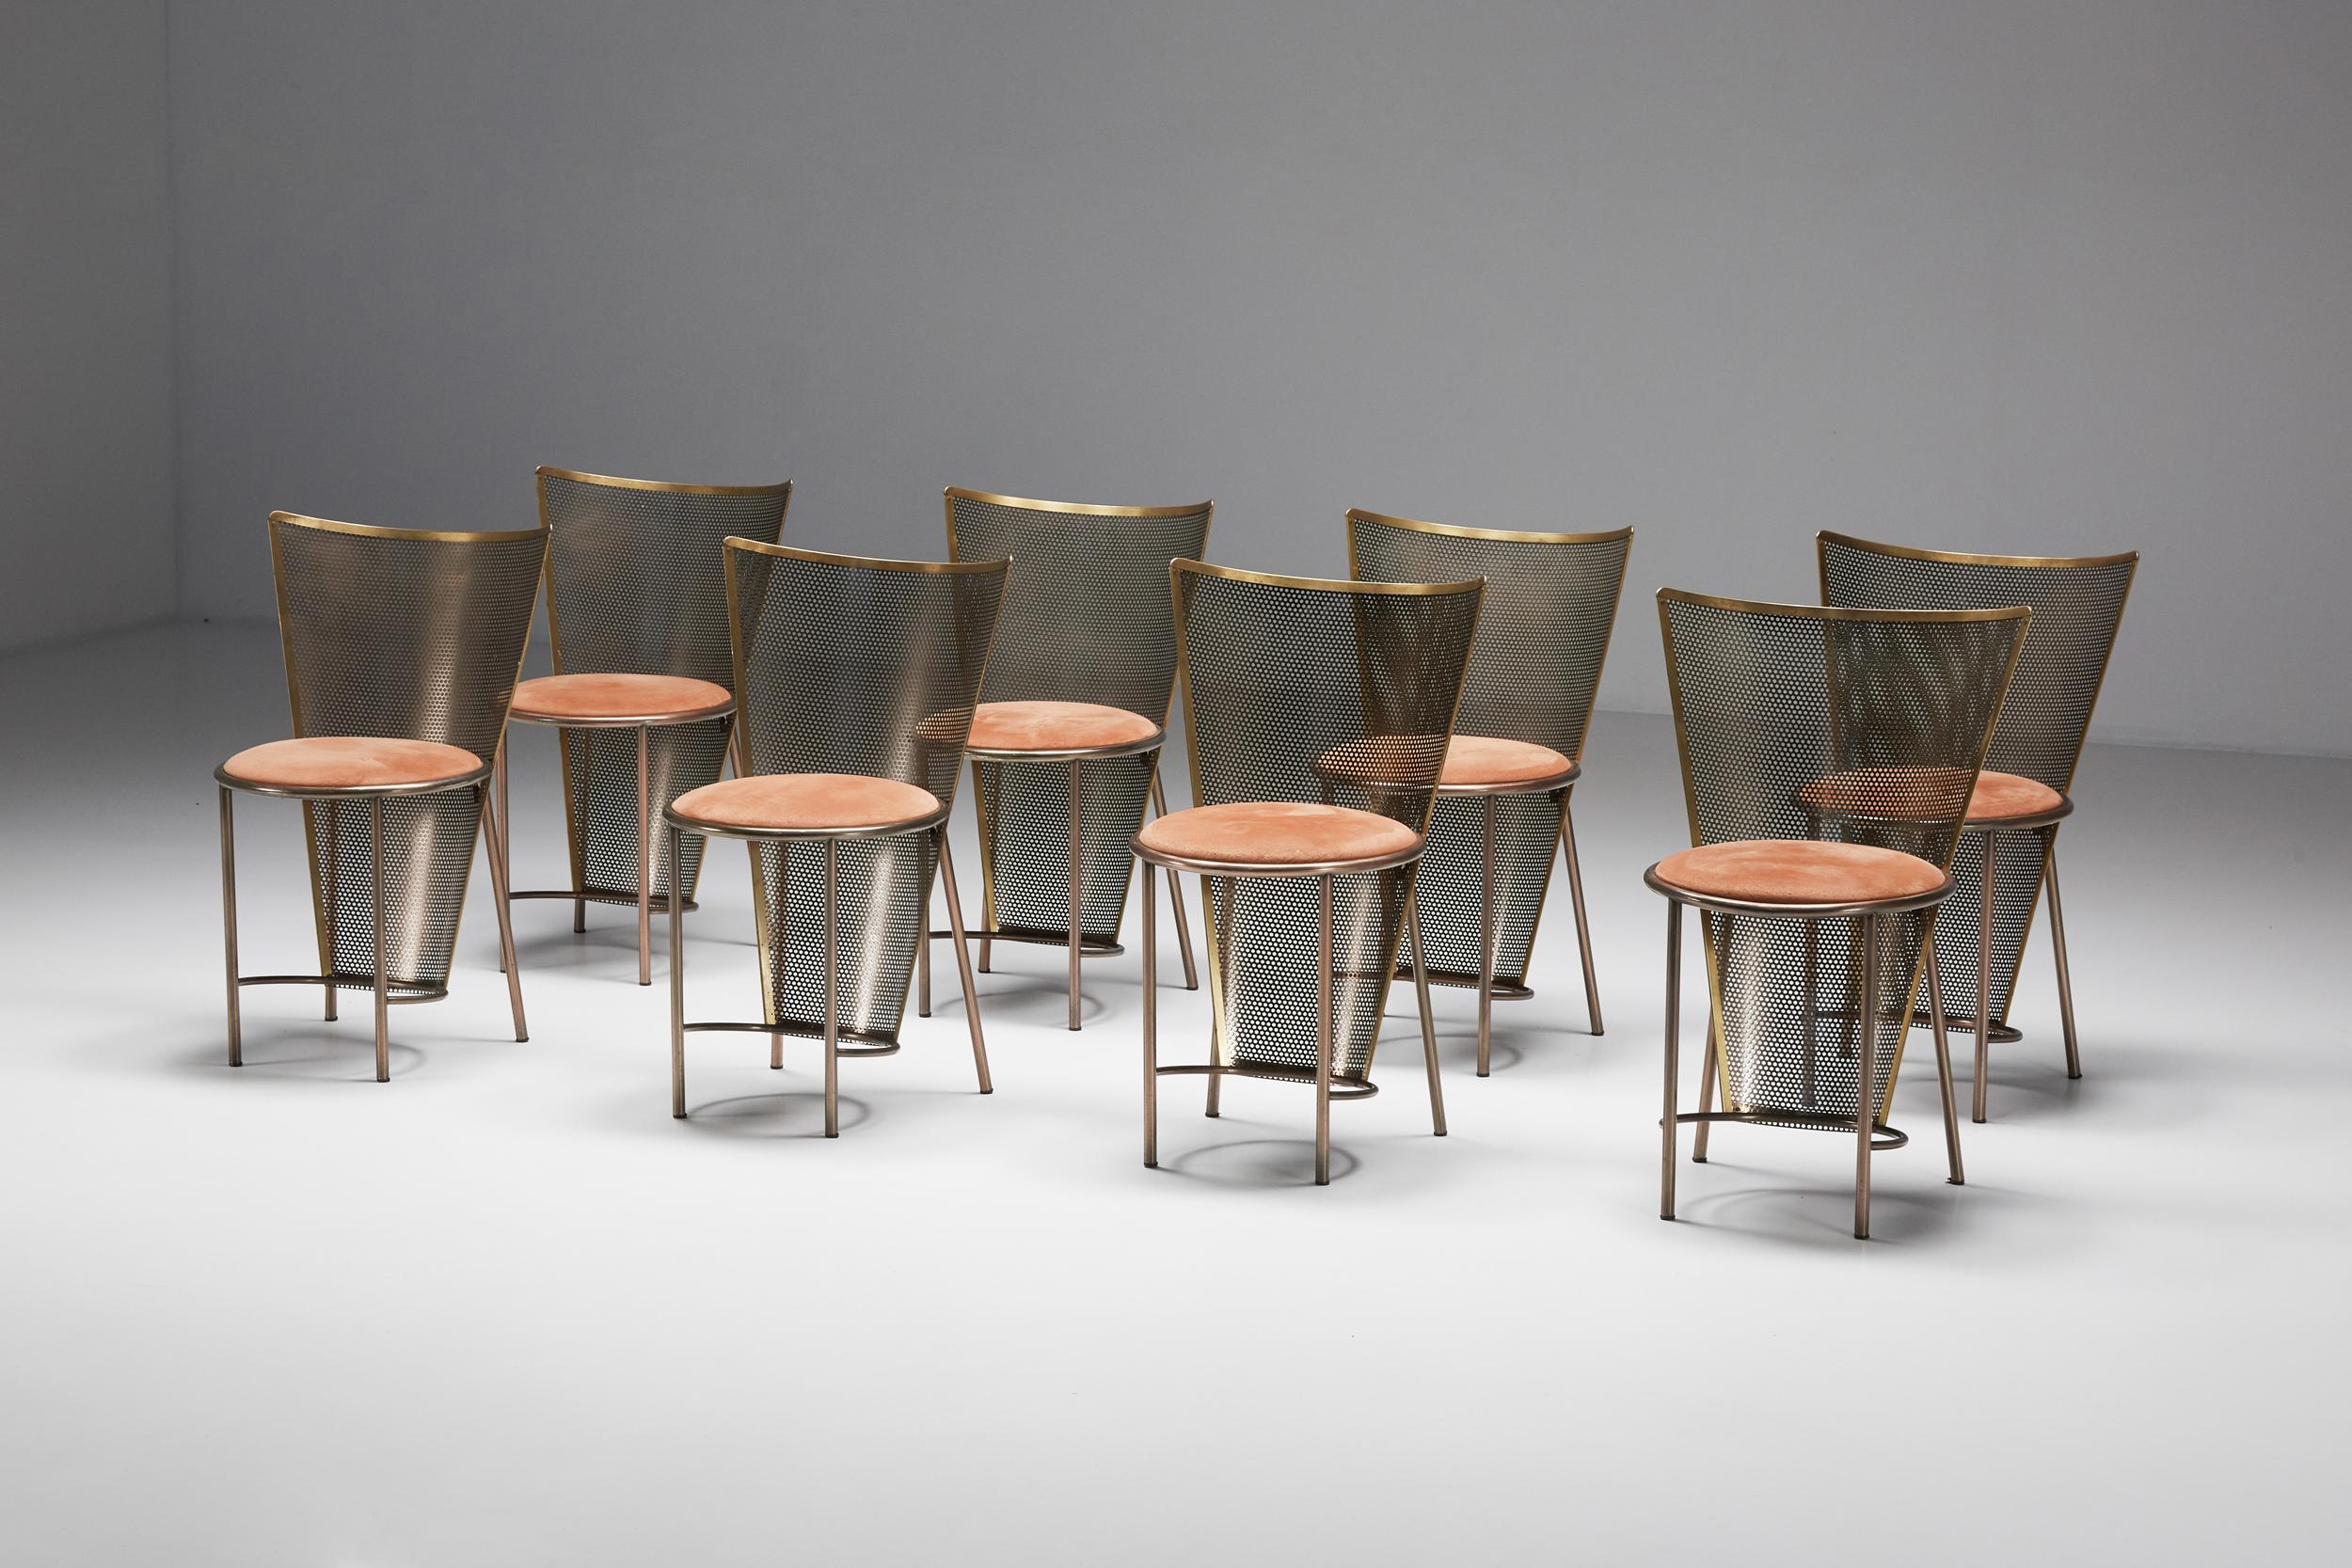 Manufactured by BelgoChrom, designed by Frans Van Praet.
Extremely rare set of 12 chairs exhibited at the Belgian Pavillion in the Sevilla '92 world expo.
Bronze patinated metal, brass, perforated brass back support, and coral velvet